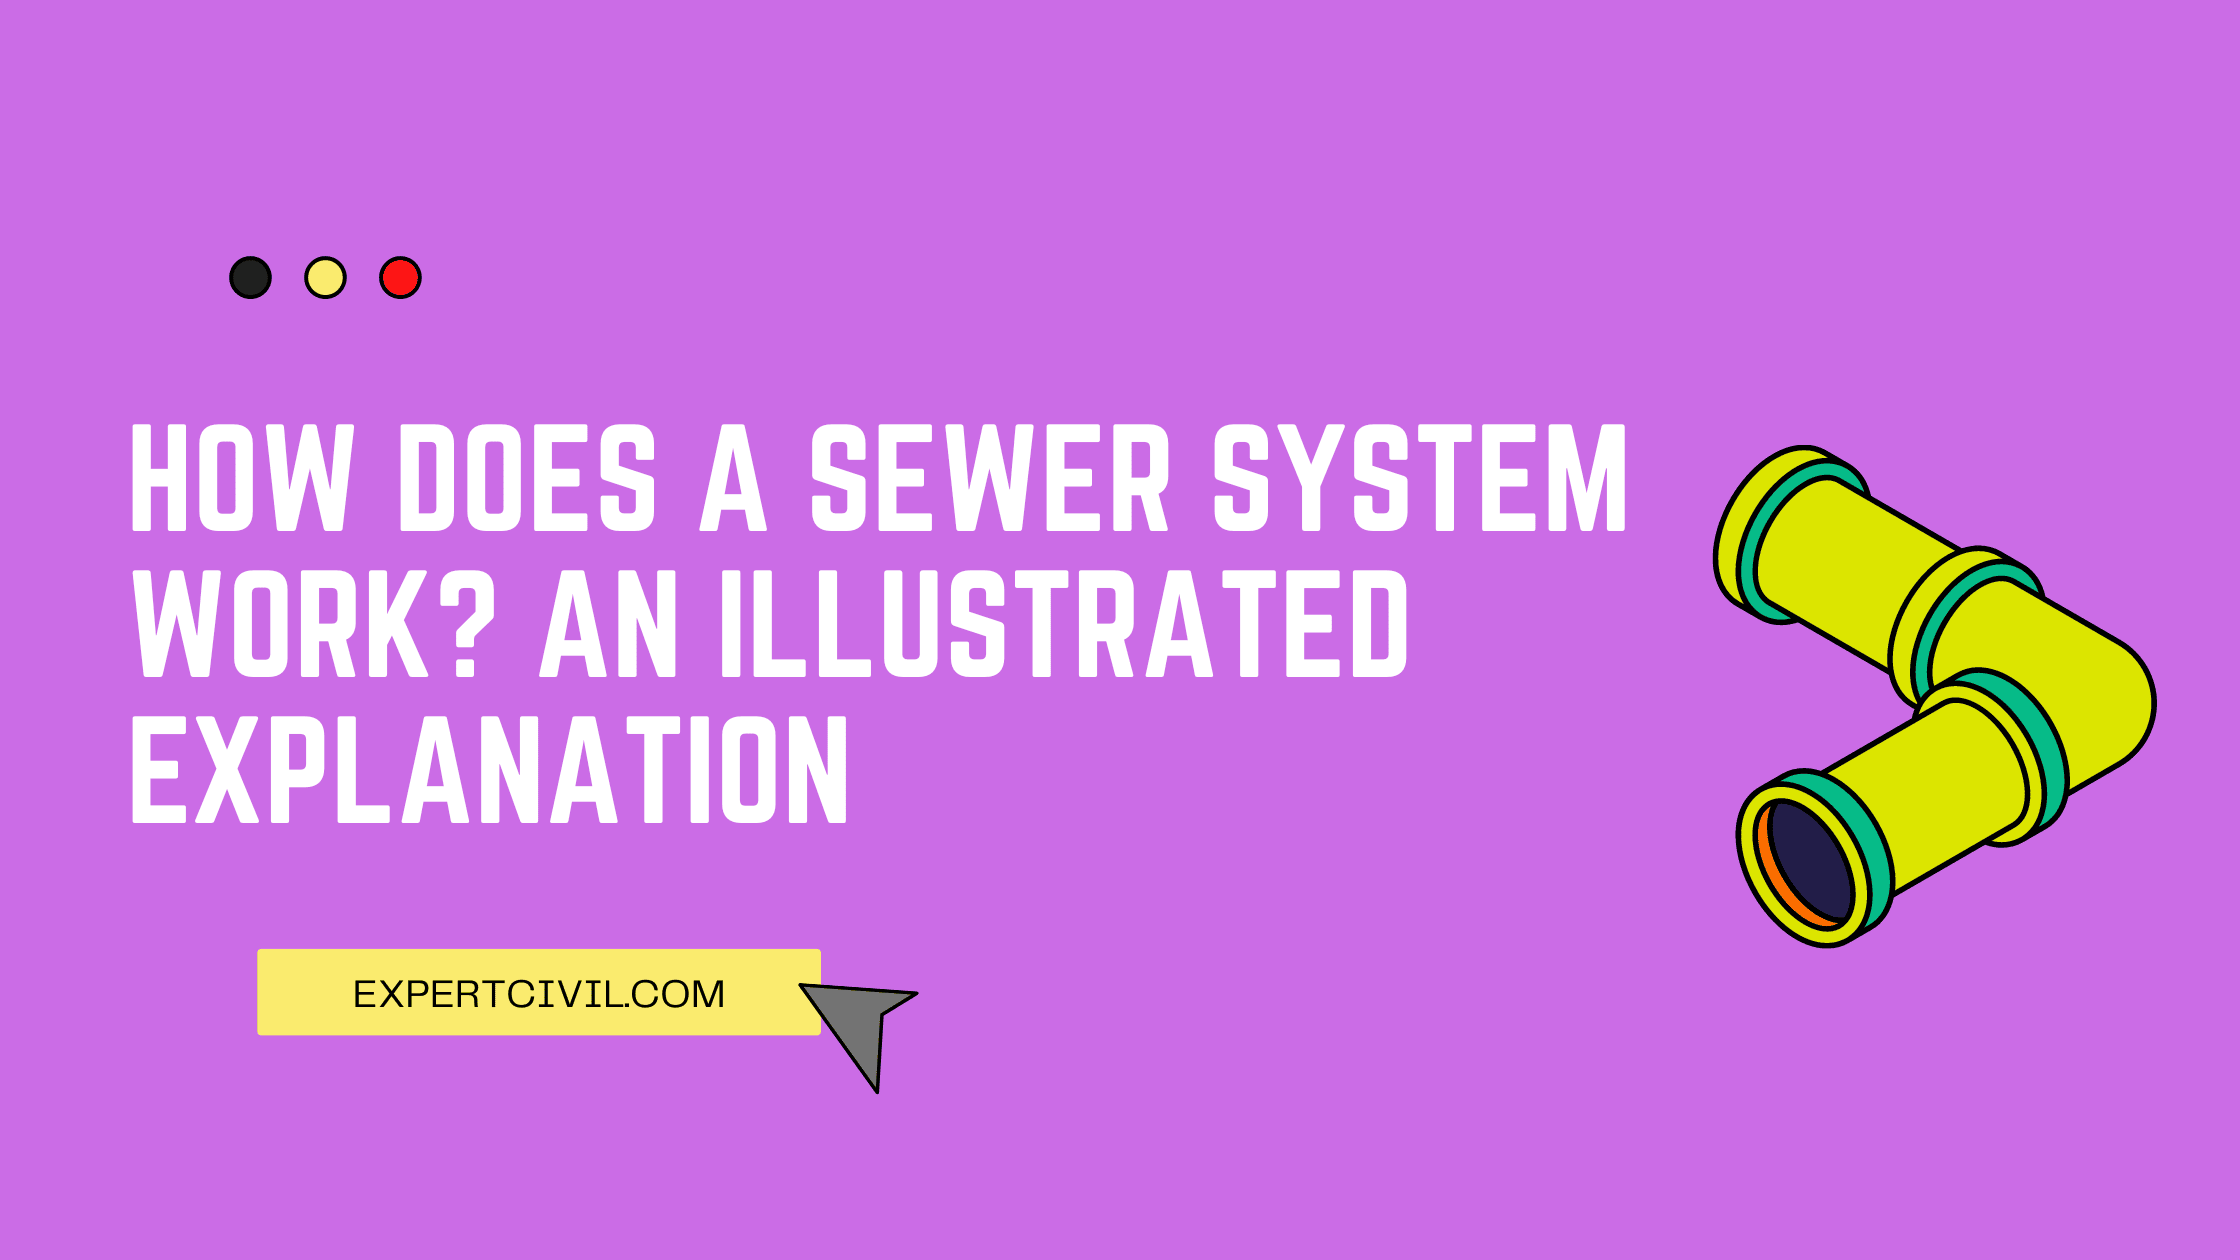 How Does a Sewer System Work? An Illustrated Explanation